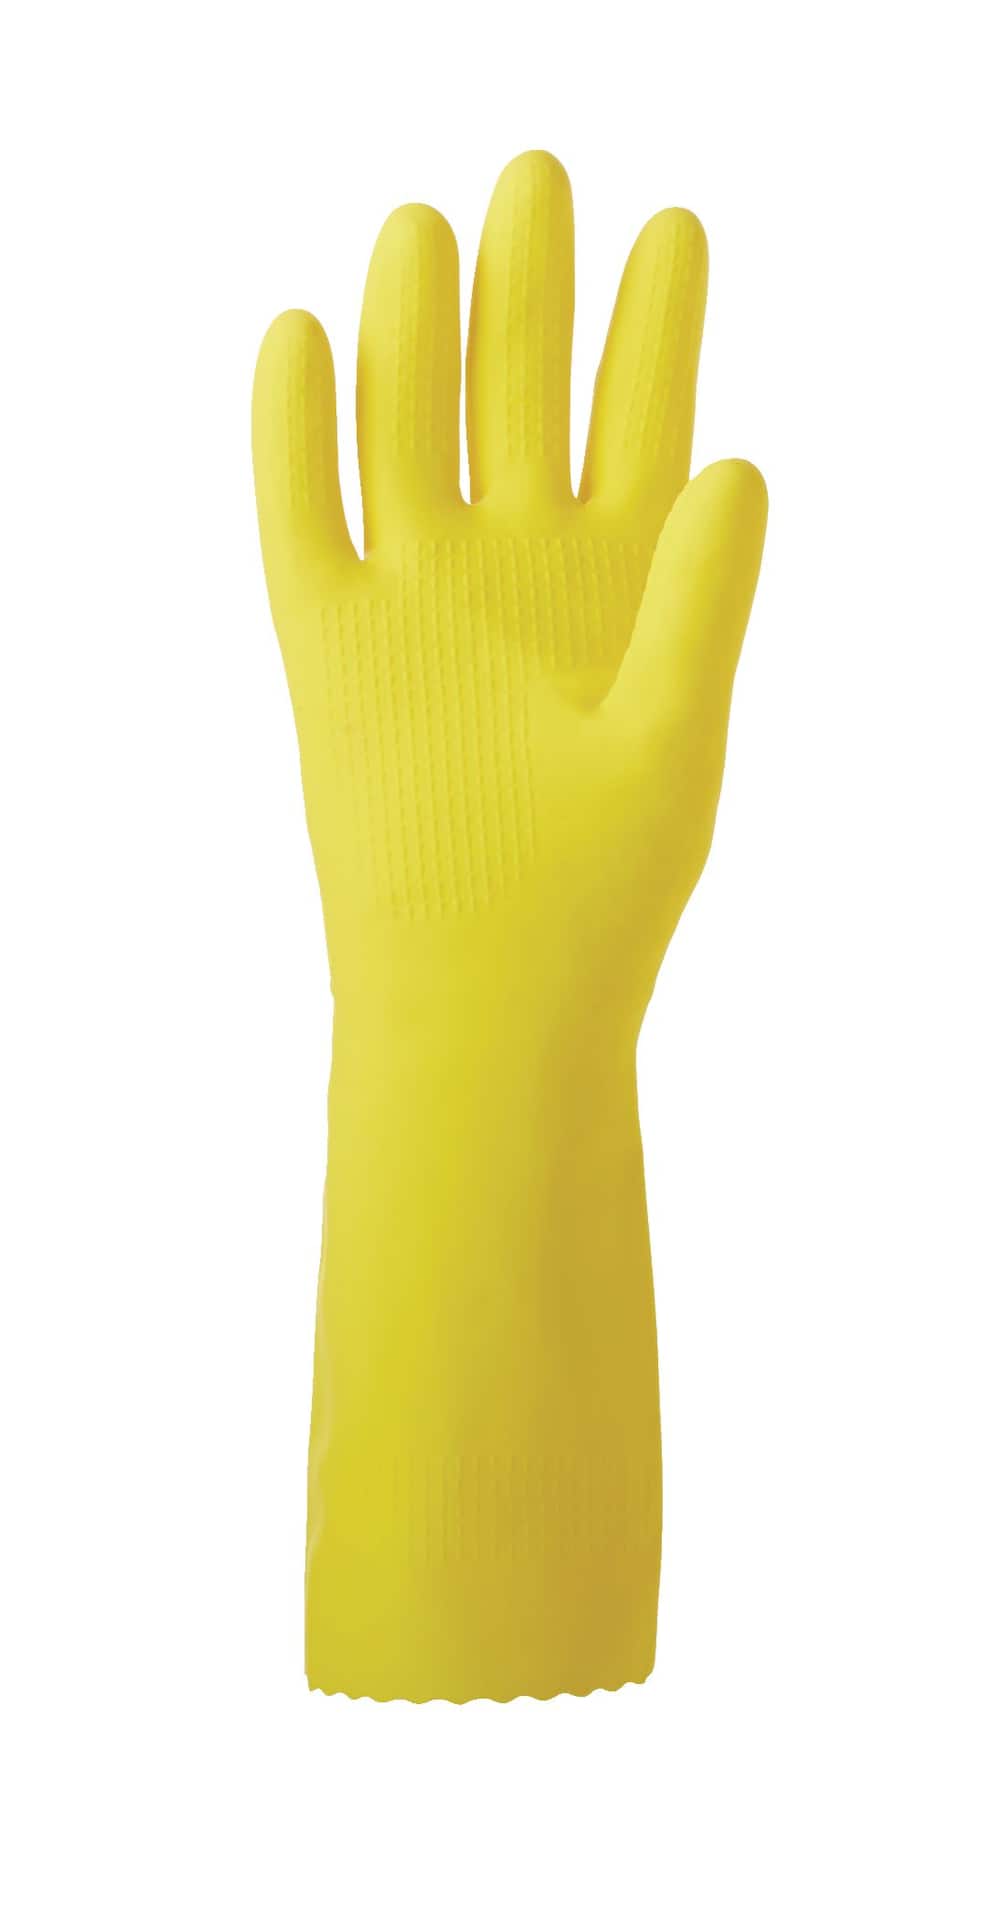 FRANK Latex Gloves, Flock Lined, Assorted Sizes, 1-Pair